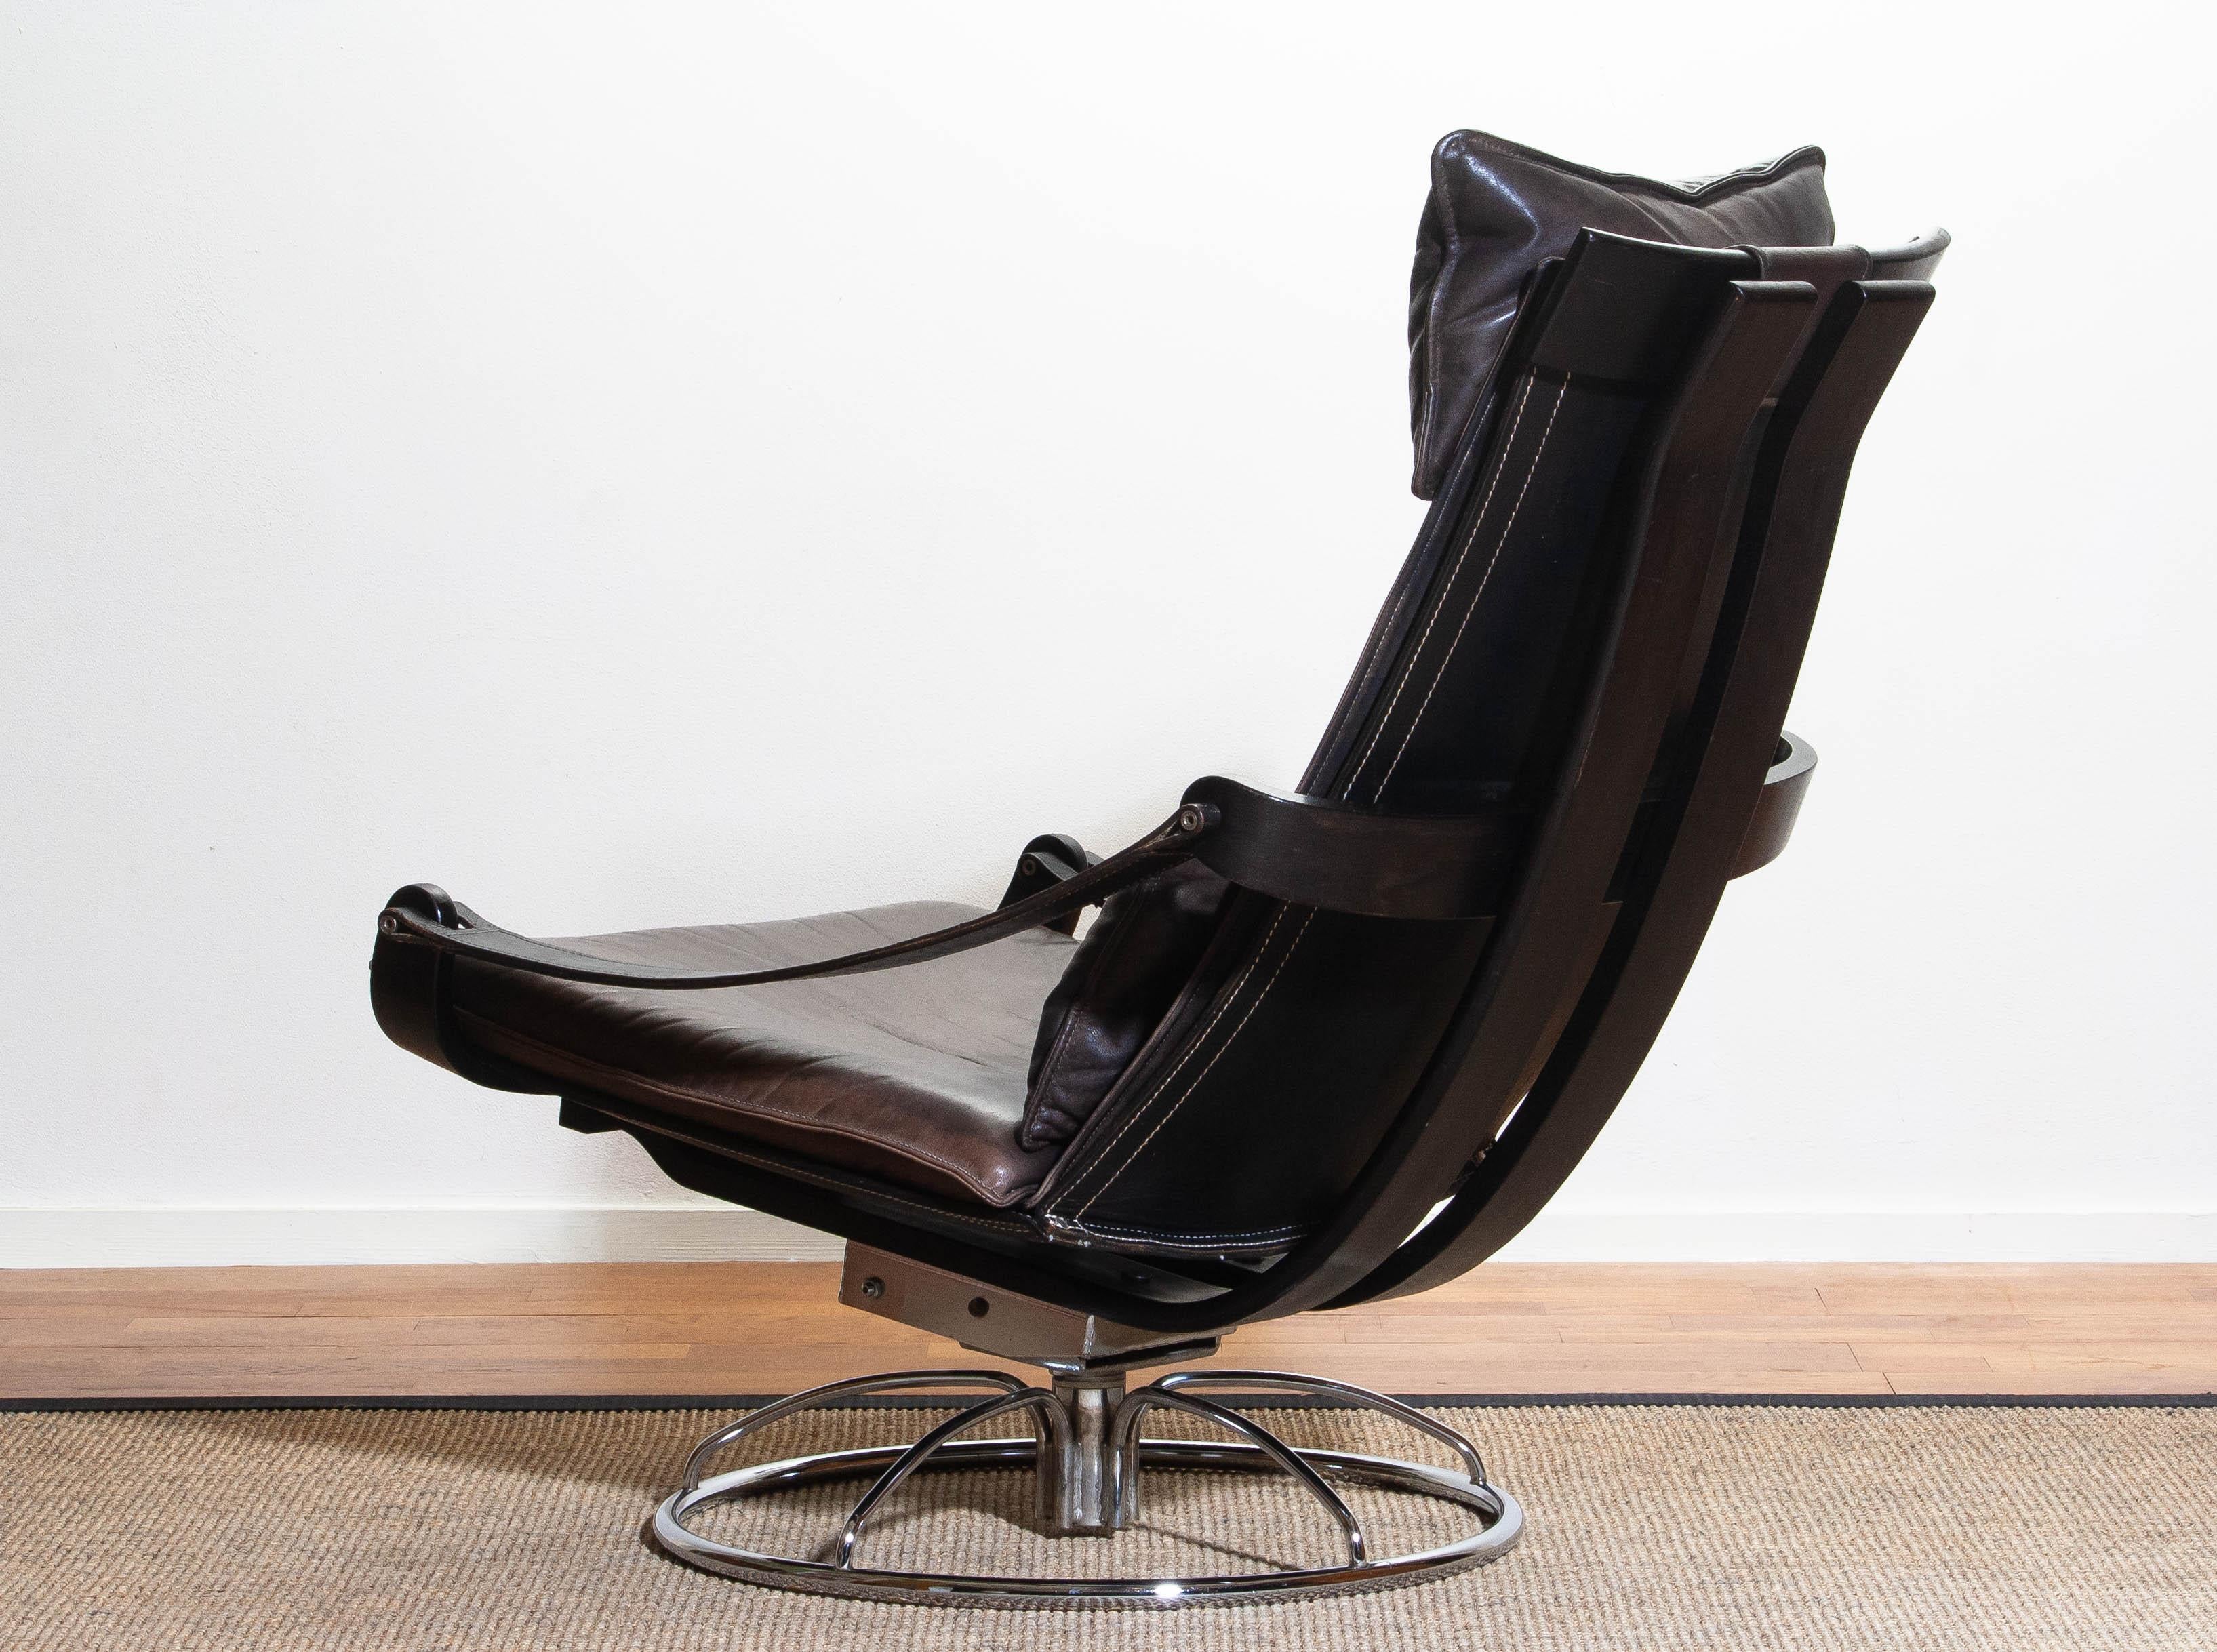 1970s Artistic Leather Swivel / Relax Chair by Ake Fribytter for Nelo, Sweden 1